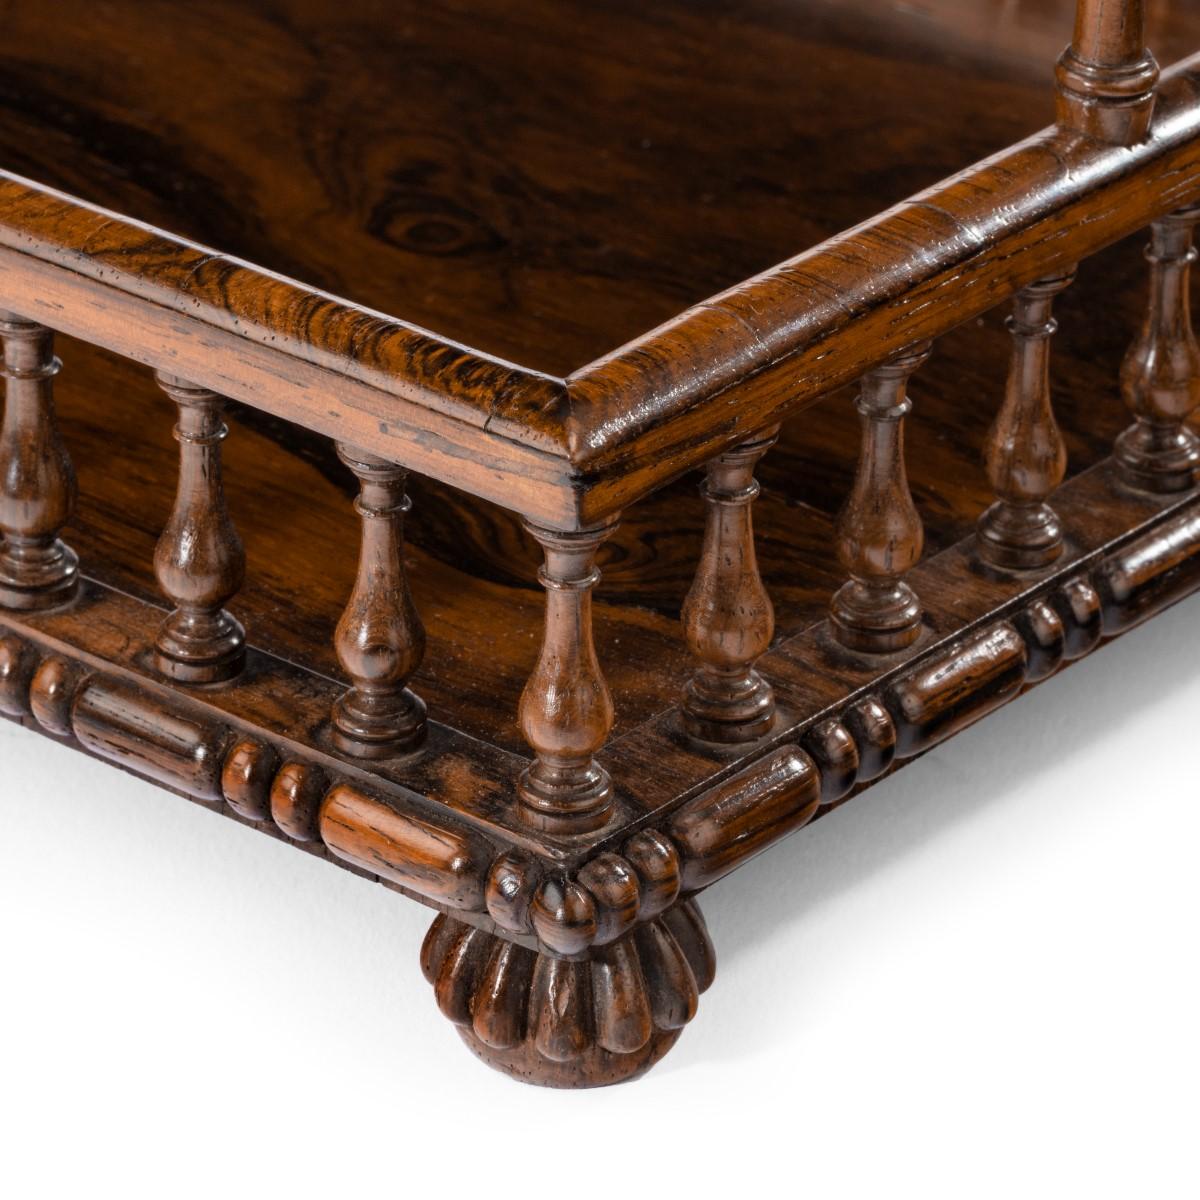 A Regency rosewood book tray attributed to Gillows